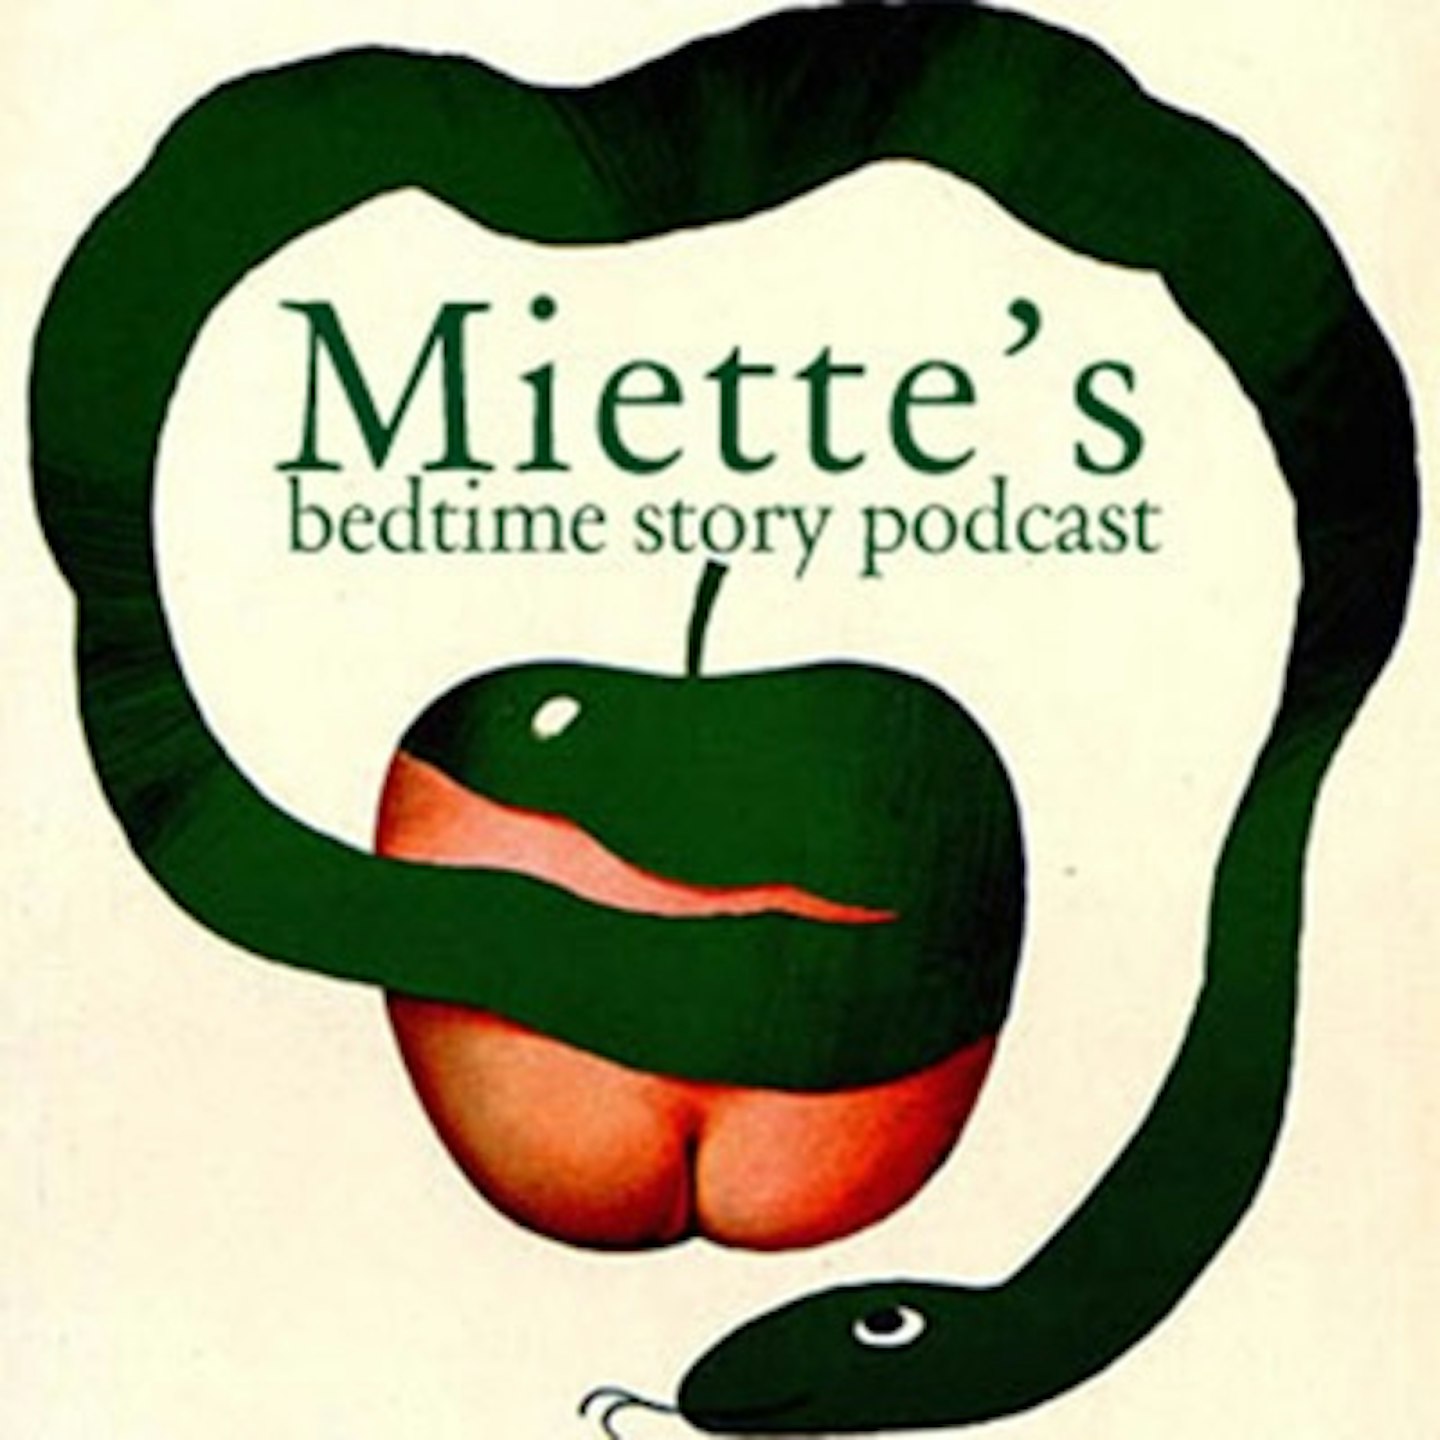 Miette's Bedtime Story Podcast